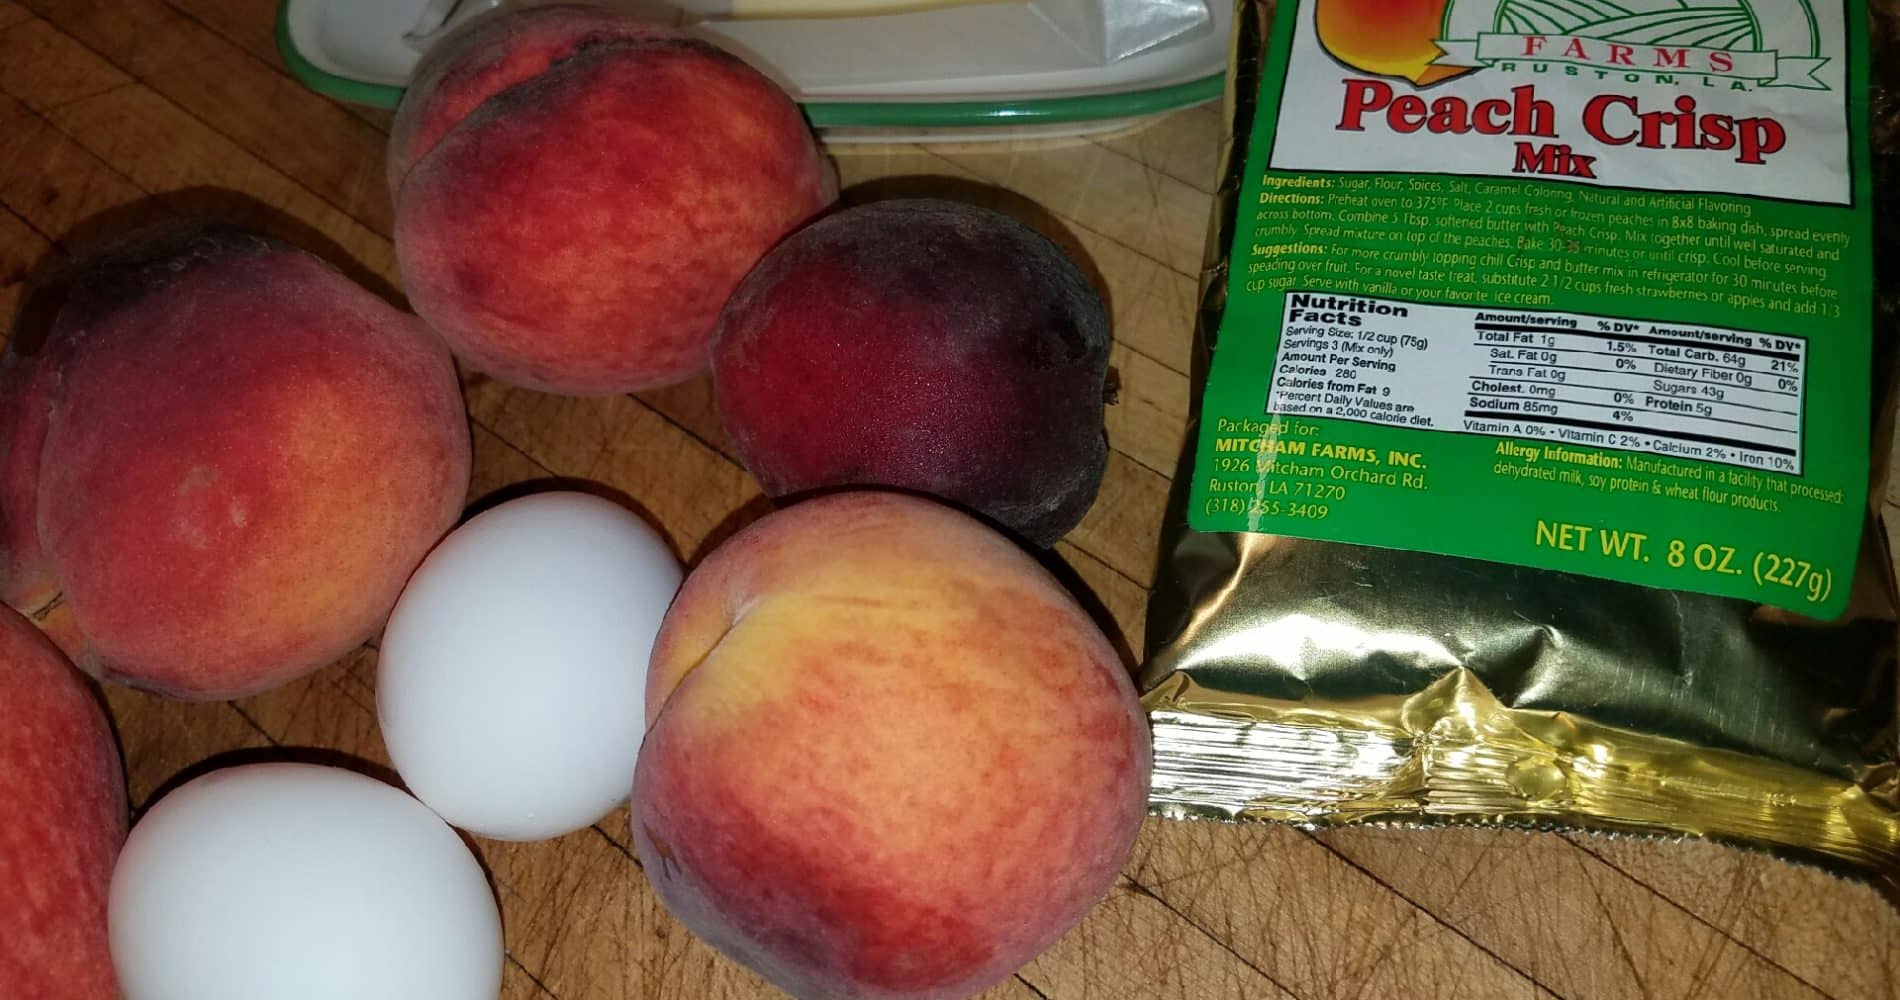 Red peaches, 2 eggs, butter, peach crisp mix on table